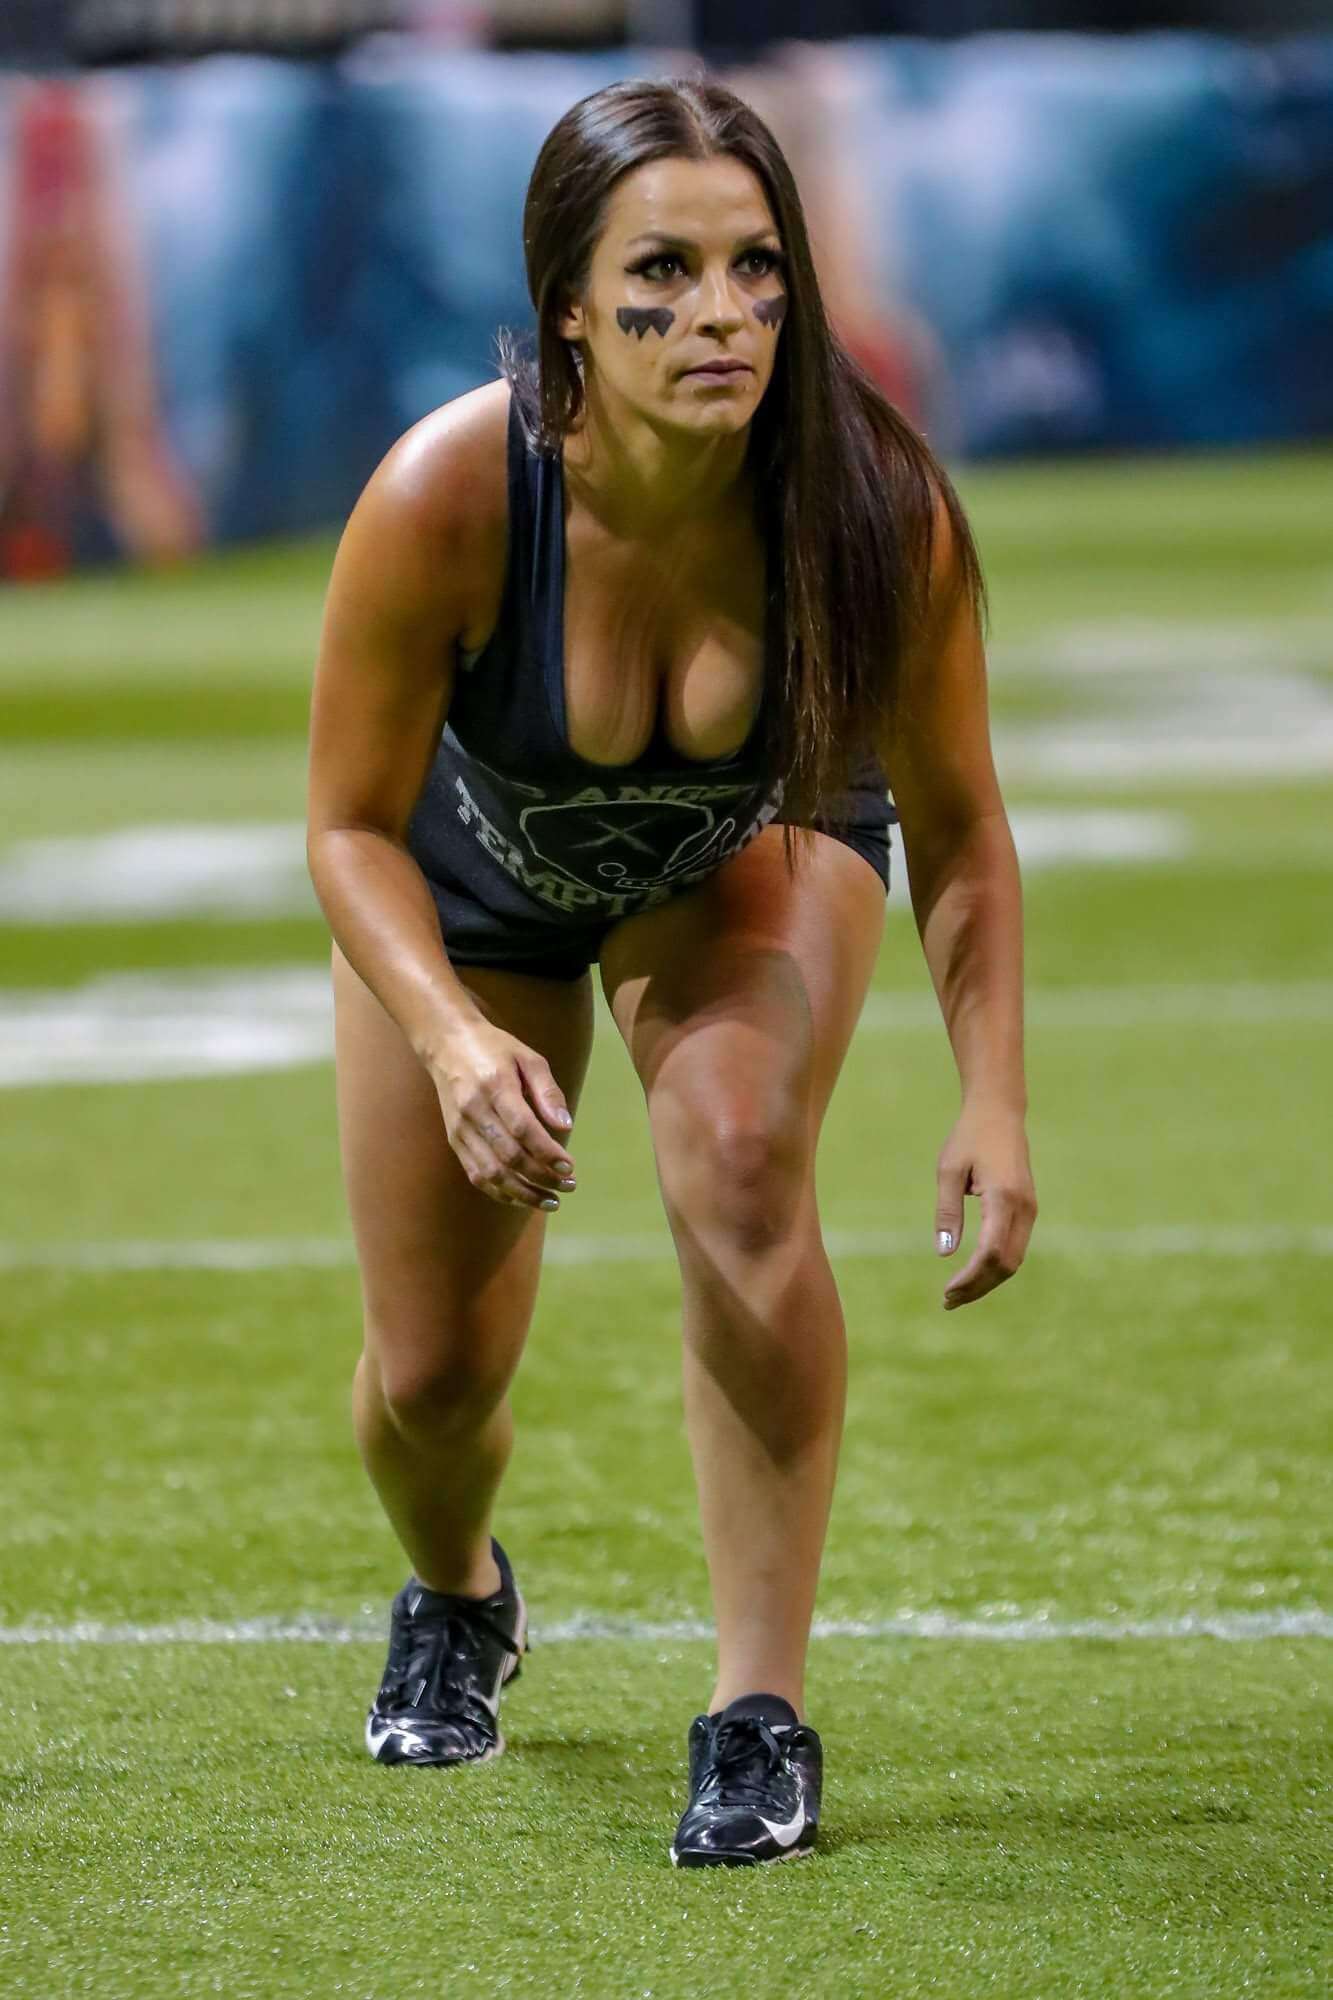 The Legends Football League Beautiful Women And Football, Need We Say Anymore! 40